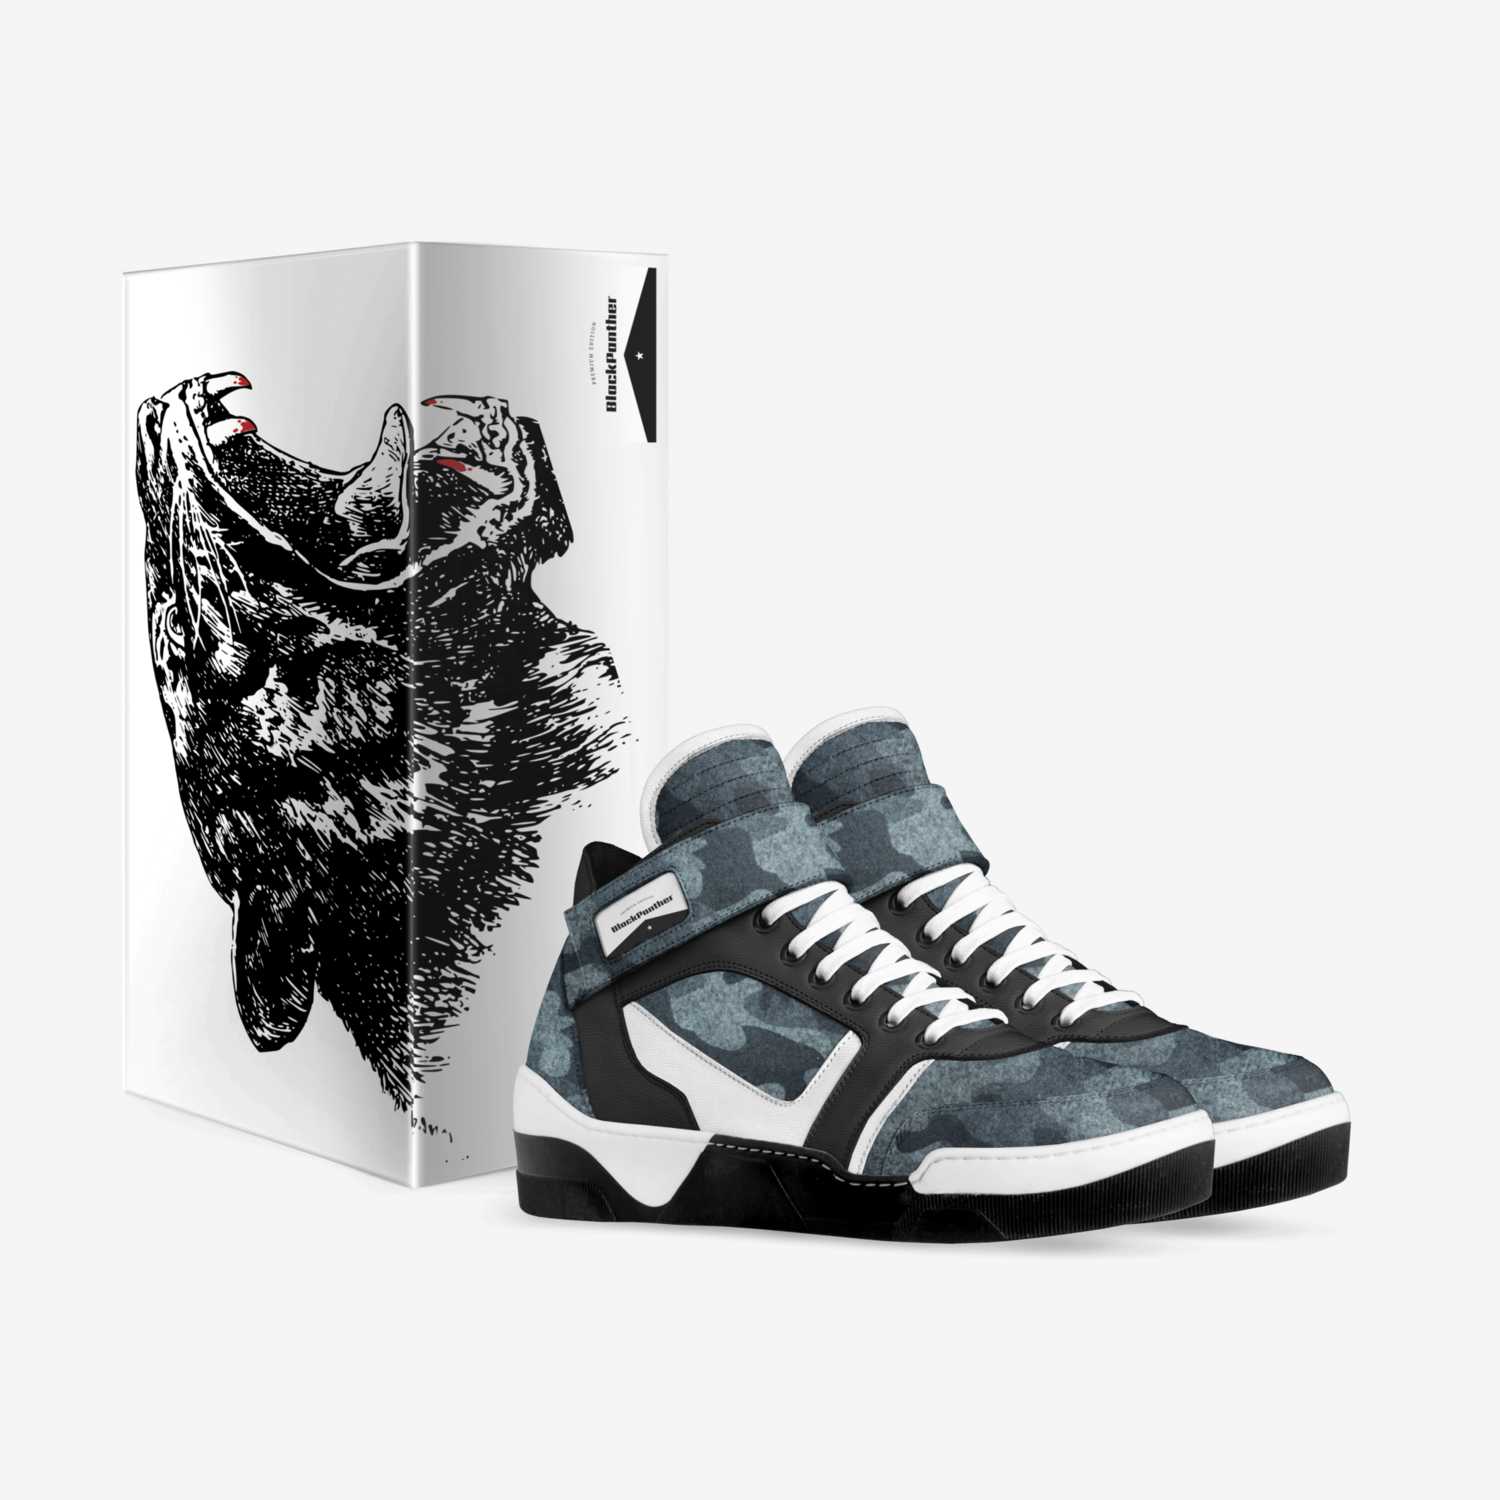 BlackPanther custom made in Italy shoes by Strike Your Sporting Side | Box view